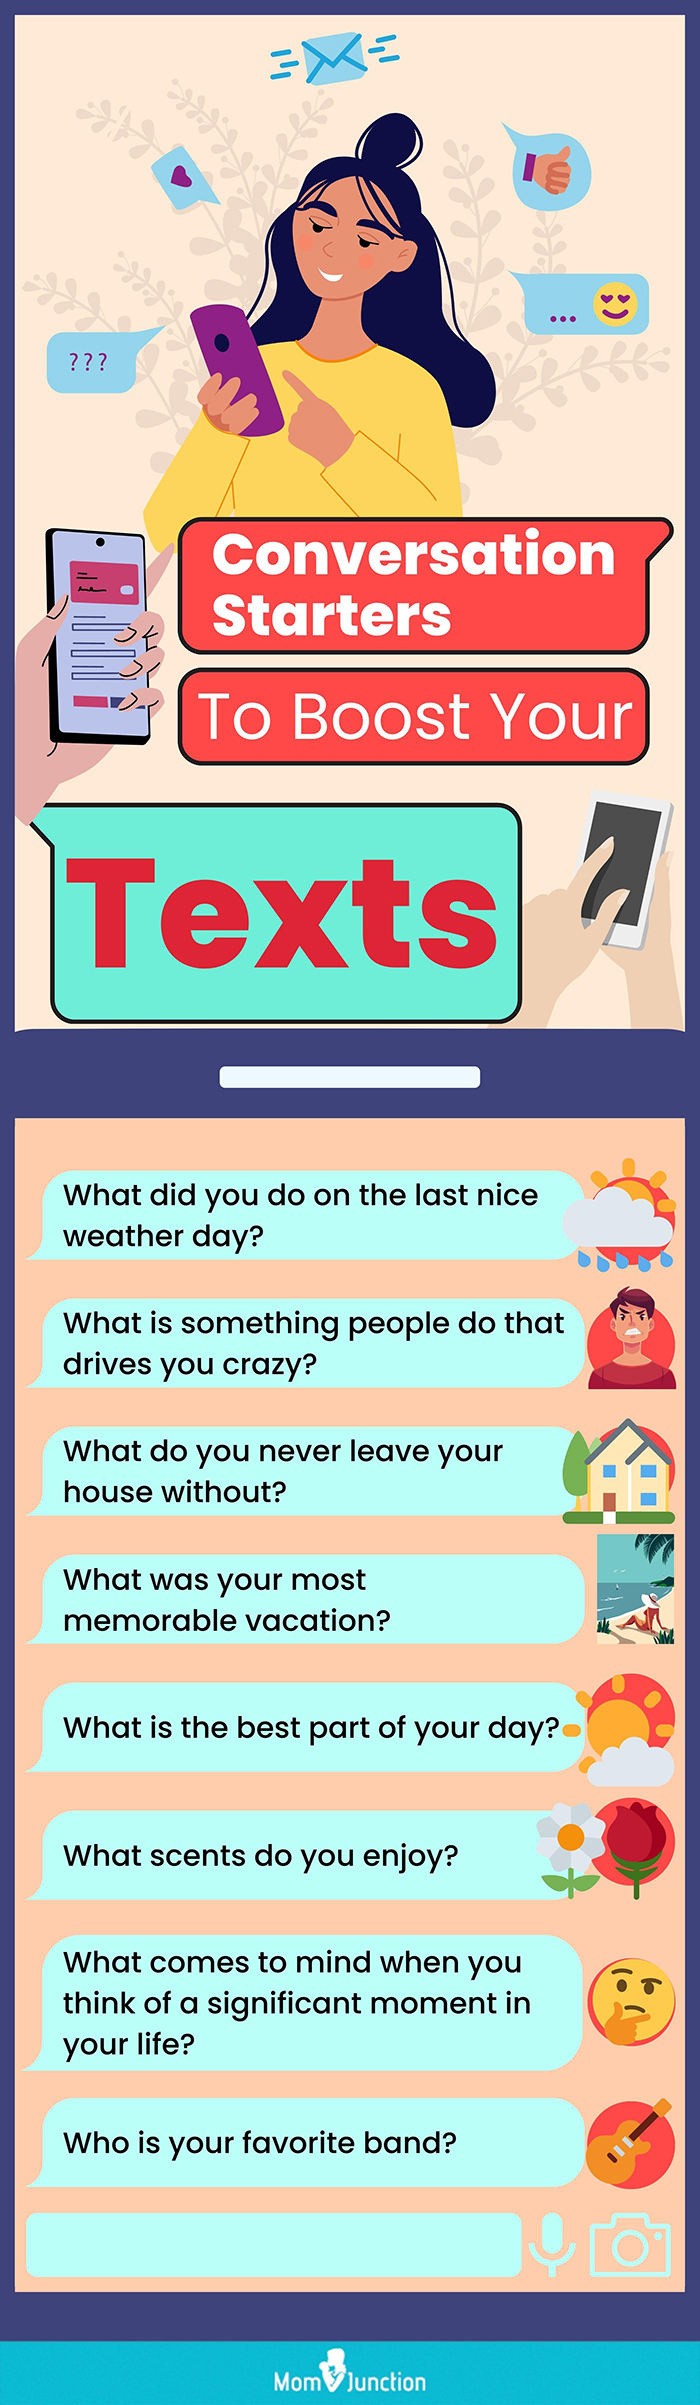 conversation starters to boost your texts [infographic]